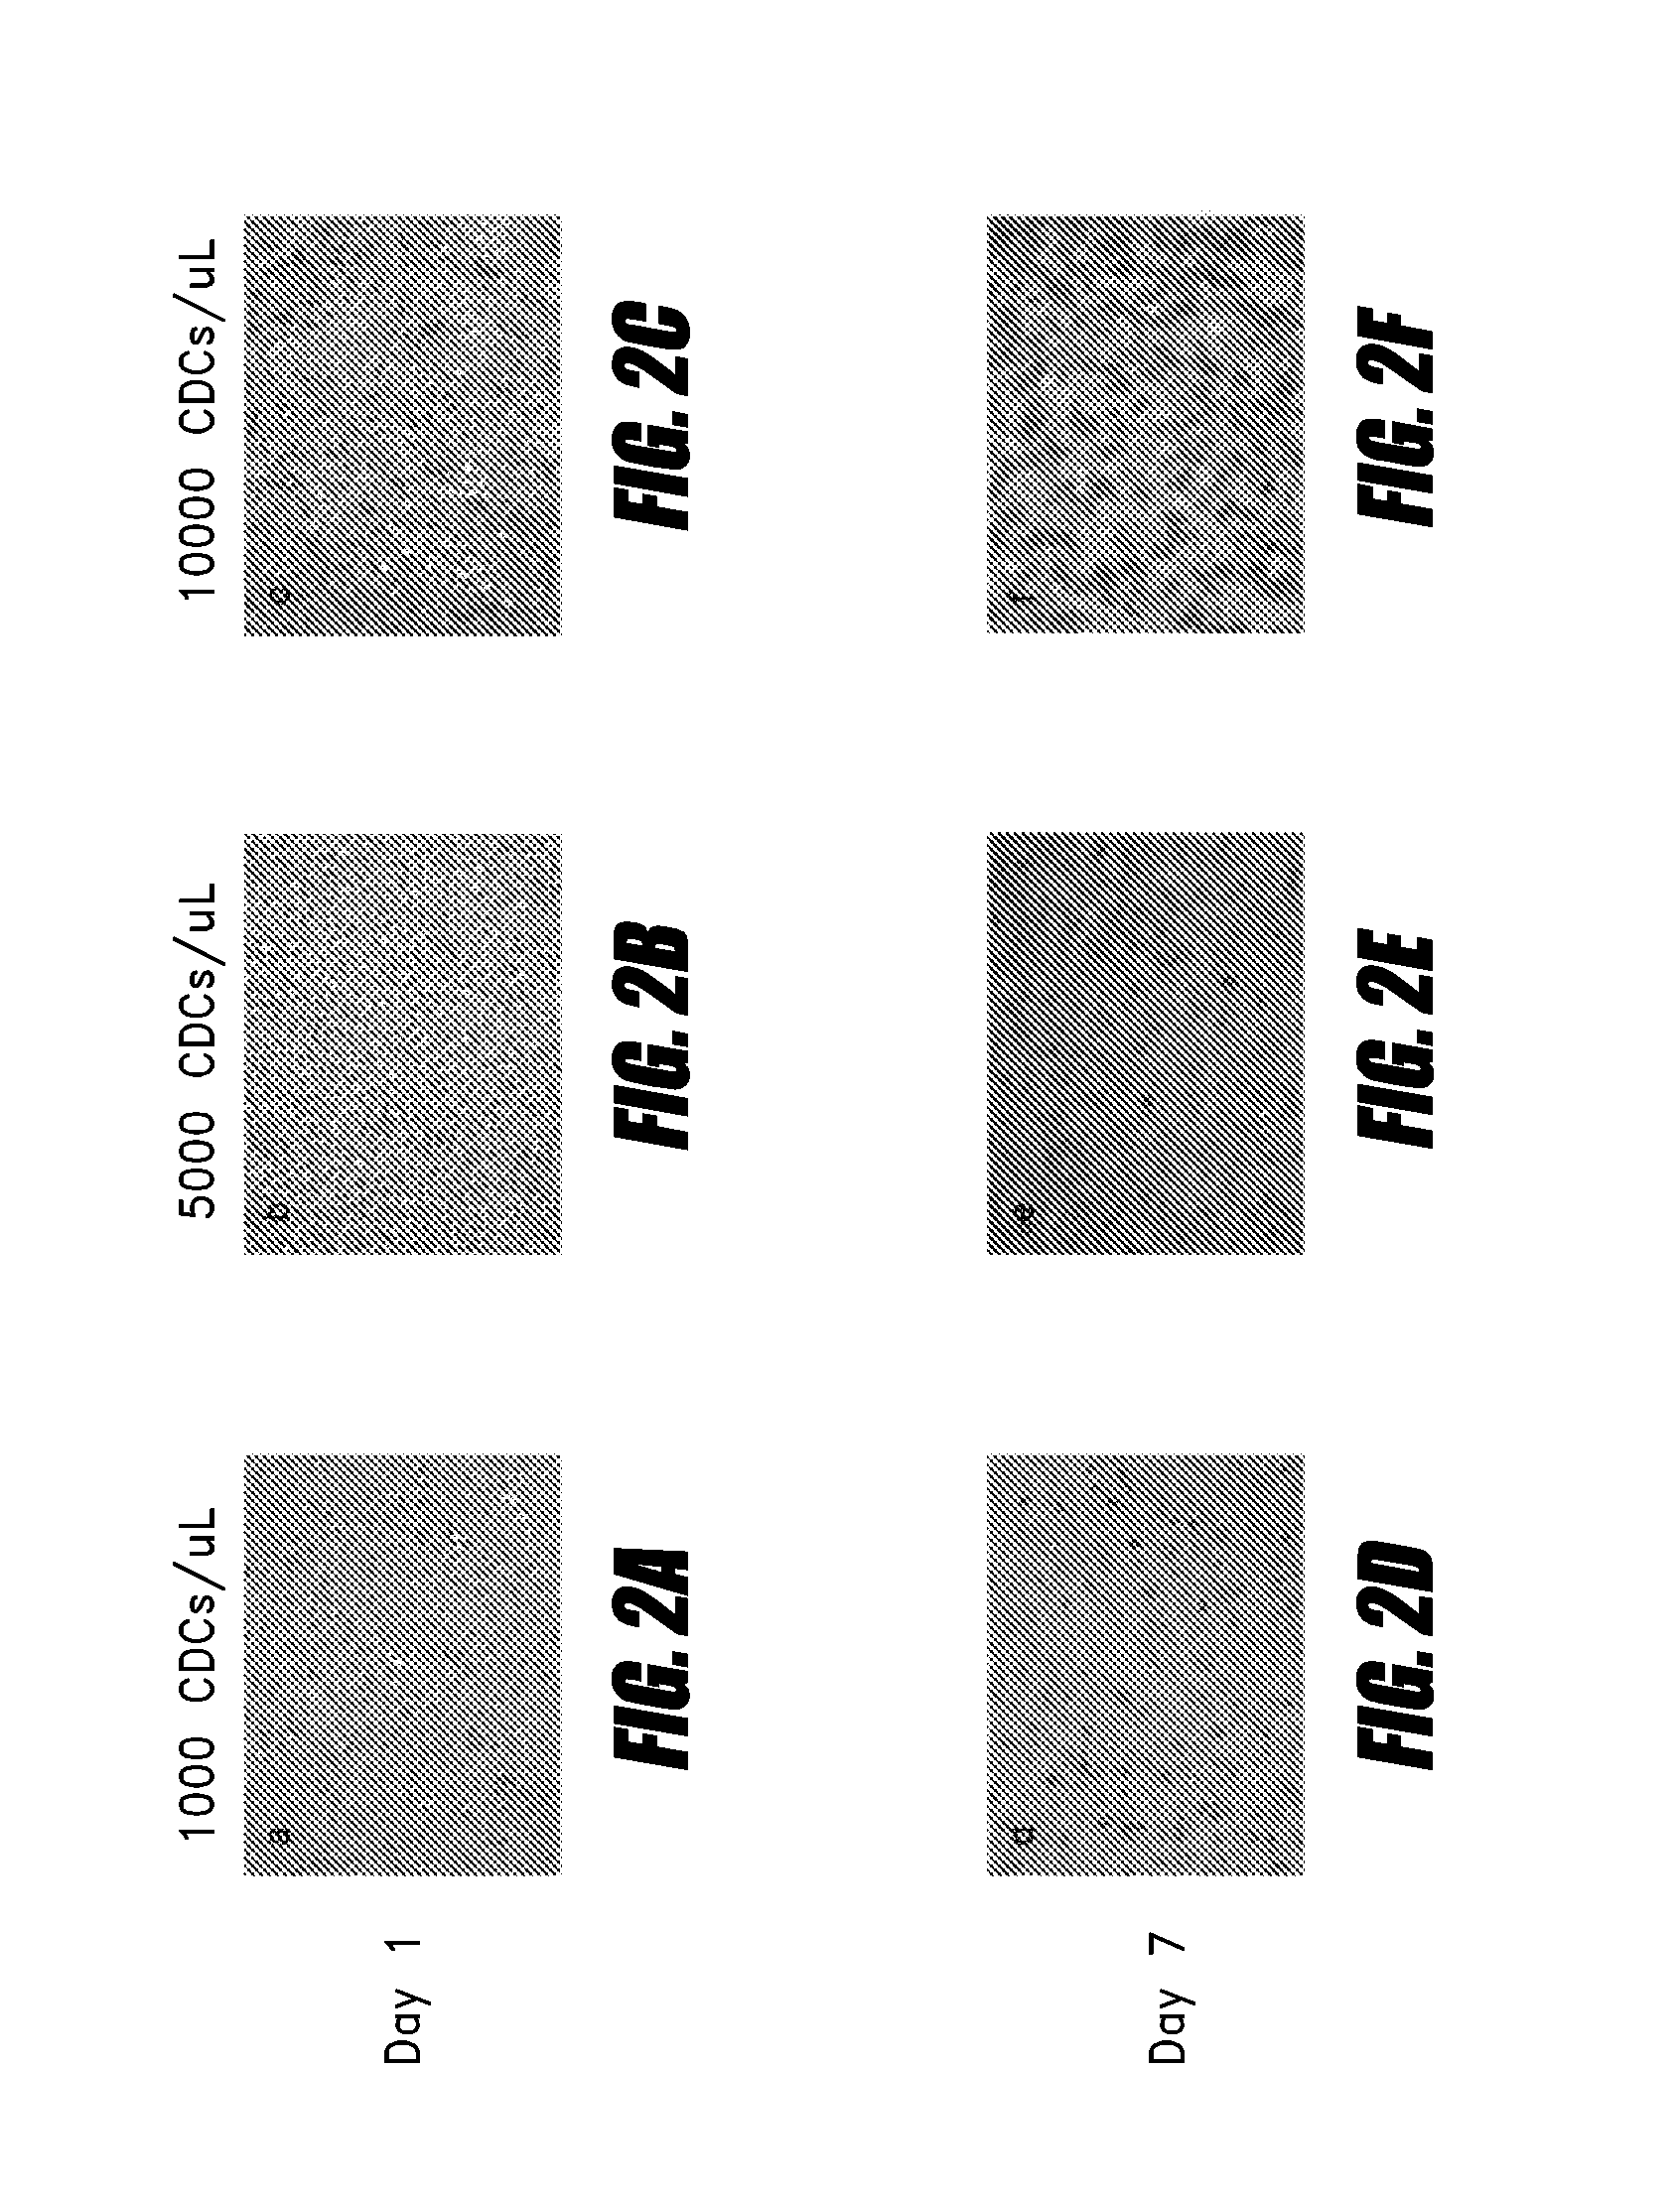 Systems and methods for cardiac tissue repair